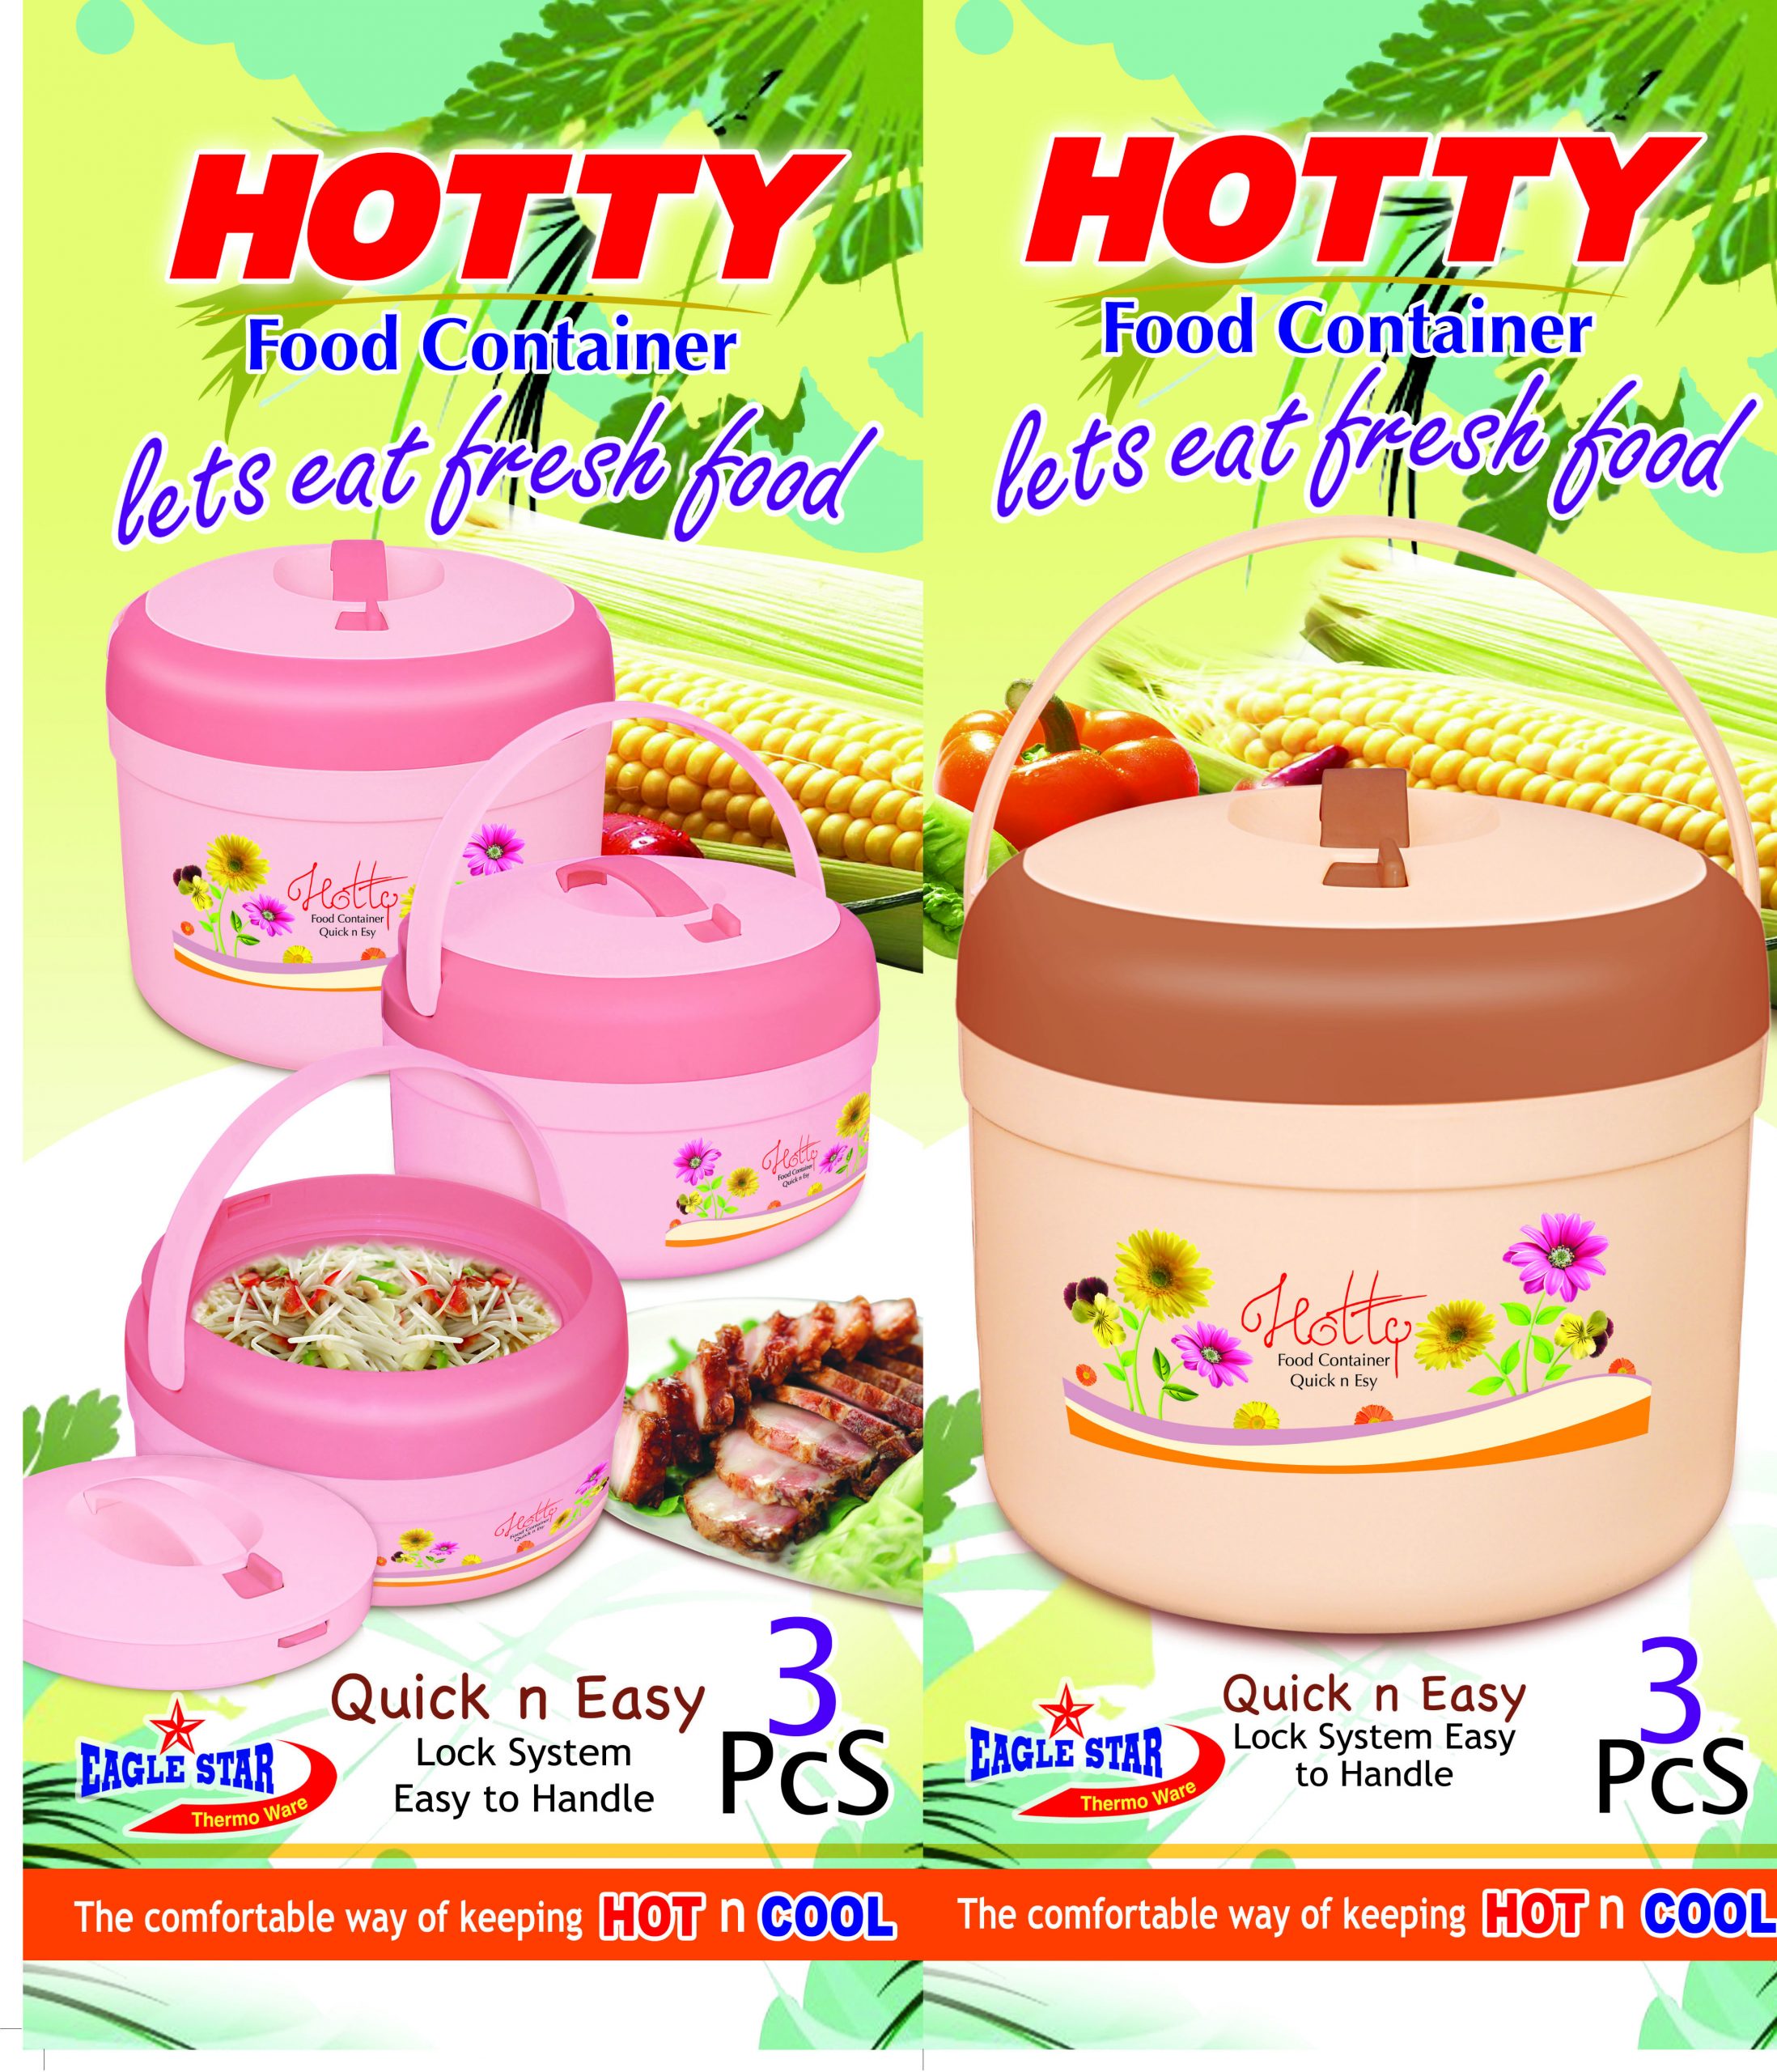 Hotty Food Container scaled